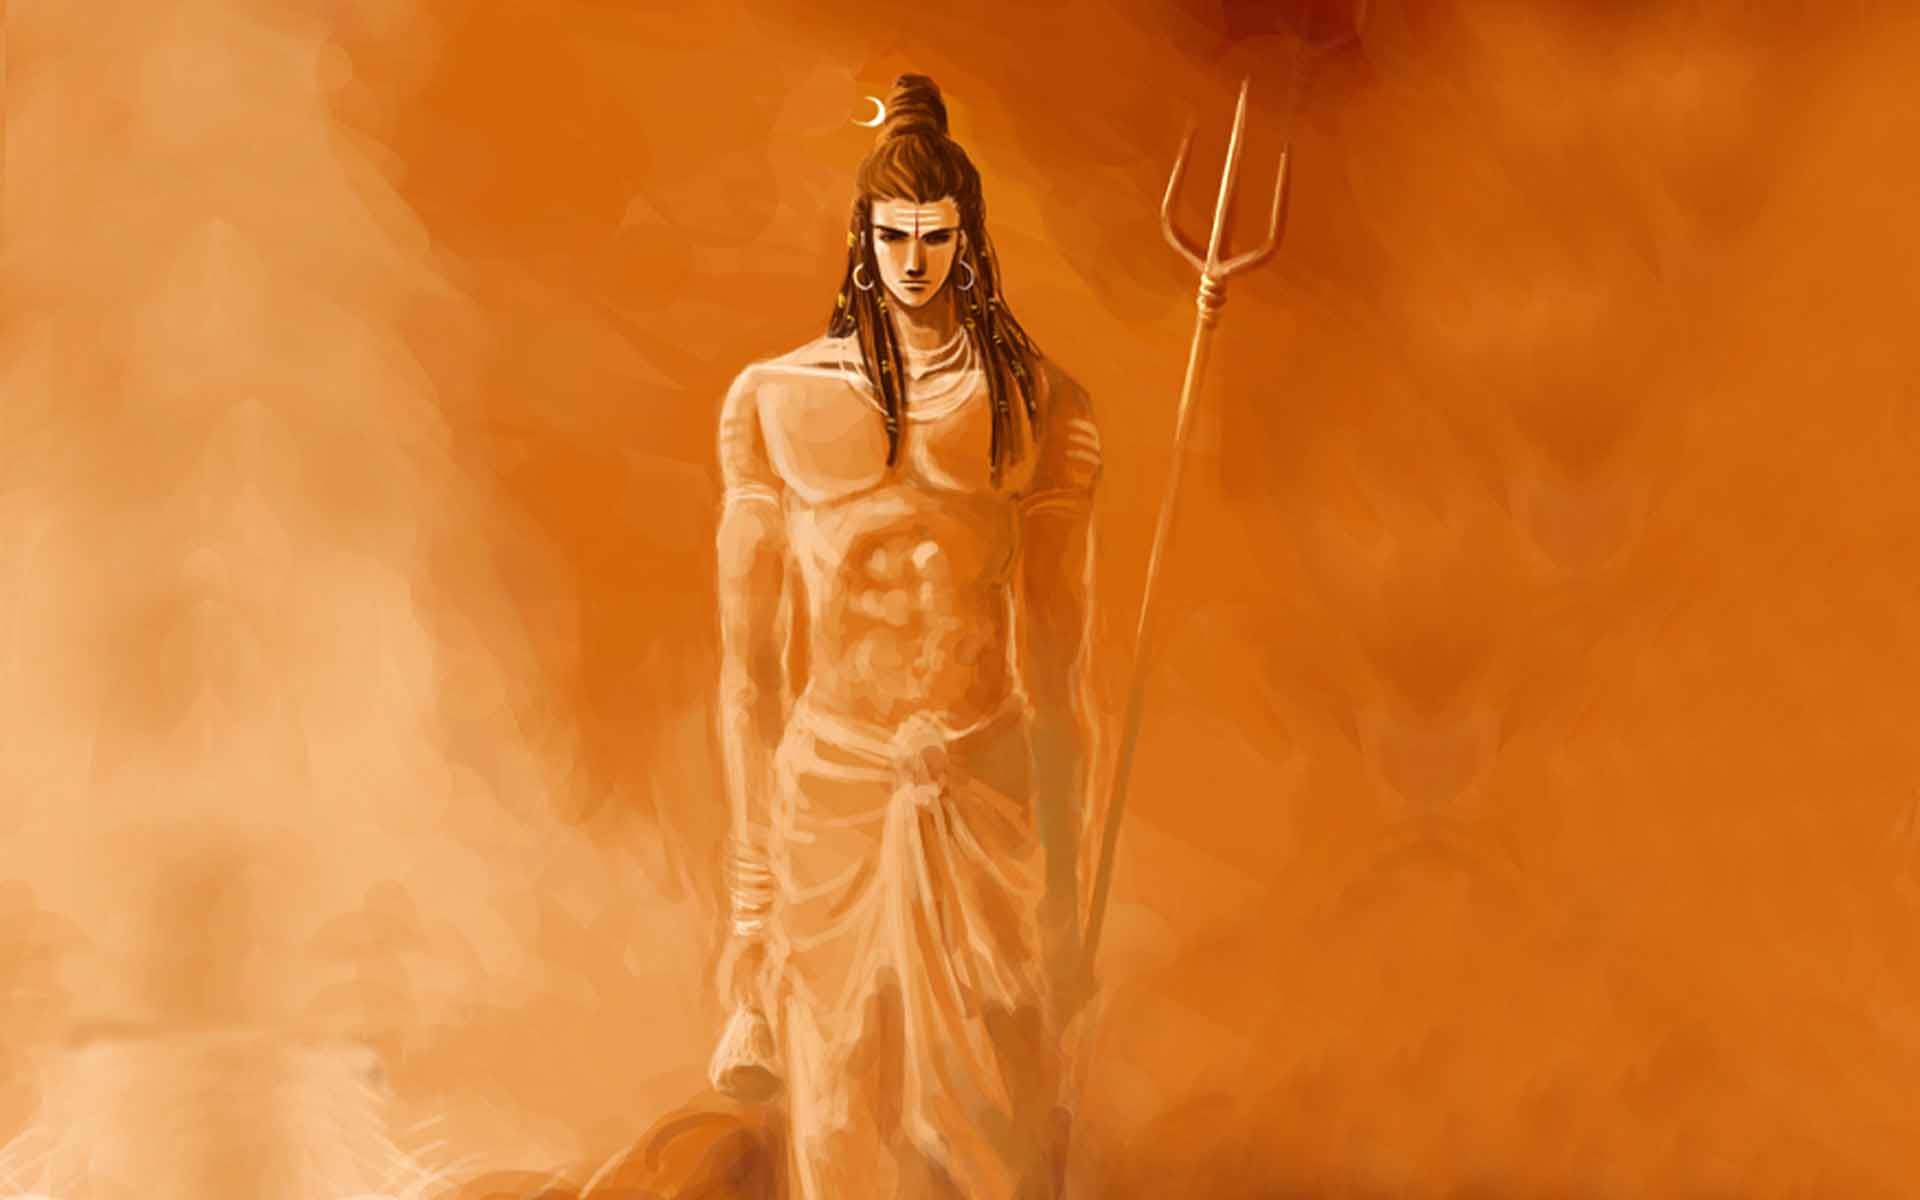 Animated Lord Shiva Images Hd 1080p 382664   HD Wallpaper Download